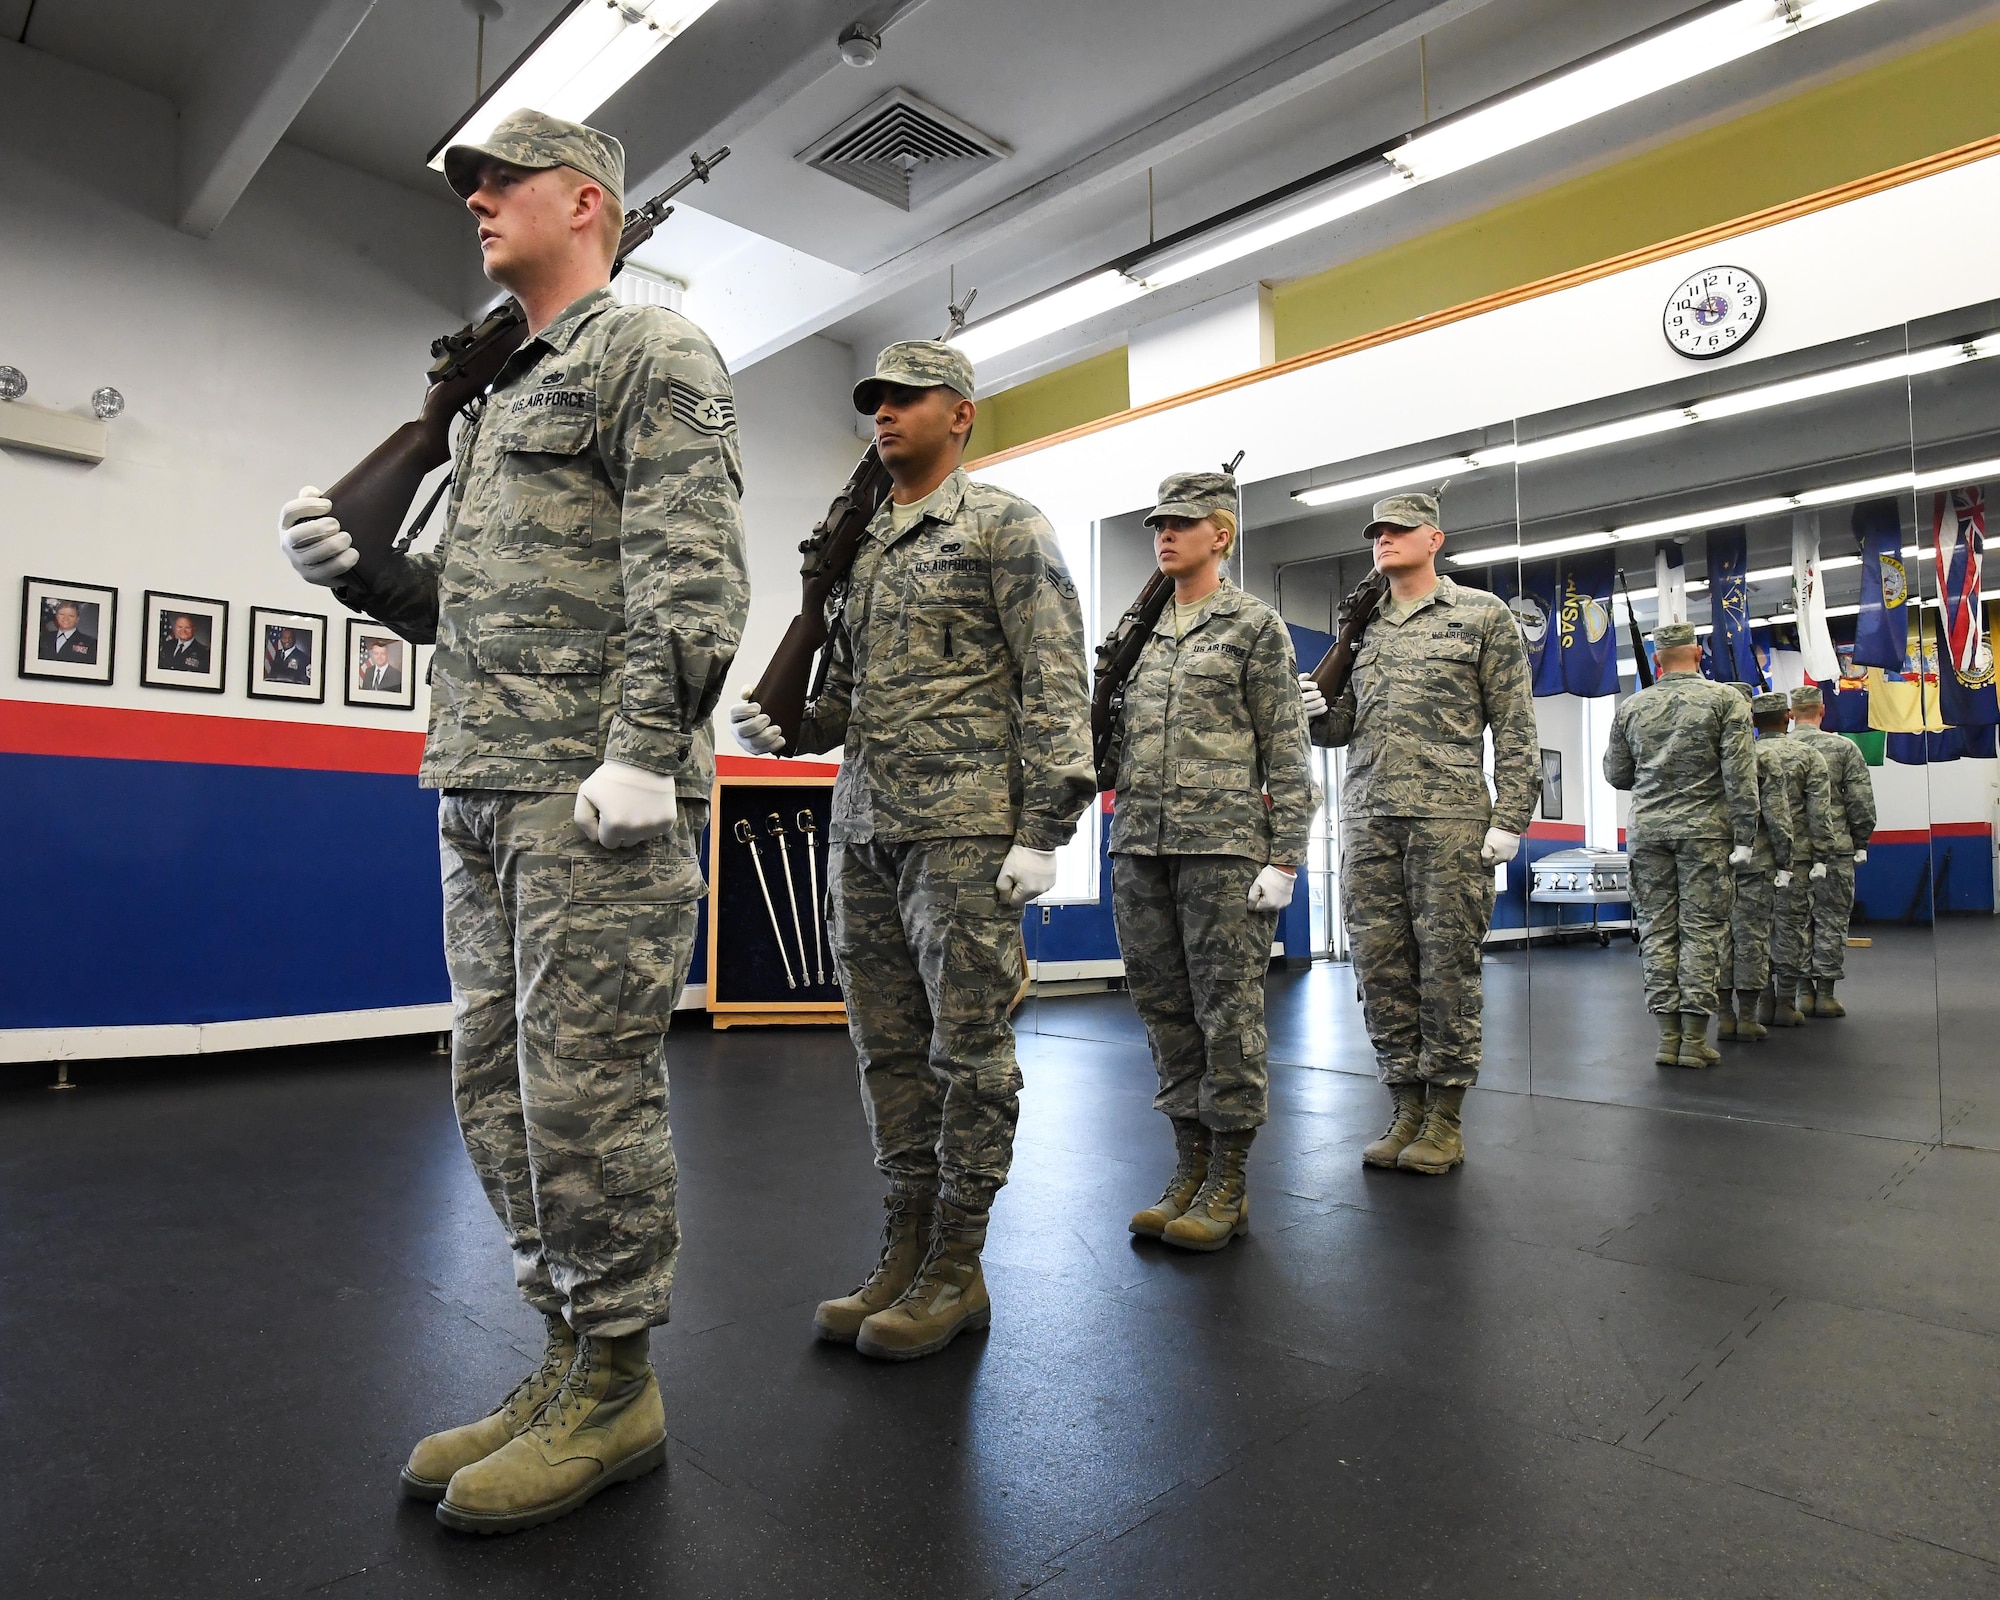 Hill AFB Honor Guard members practice standing and marching drill movements, Hill Air Force Base, Utah, March 7, 2017. Experts in military drill, ceremonies and protocol, the three flights of Hill’s honor guard each specialize in a particular ceremonial element. However, all members are trained and capable of performing all duties. (U.S. Air Force photo/R. Nial Bradshaw)